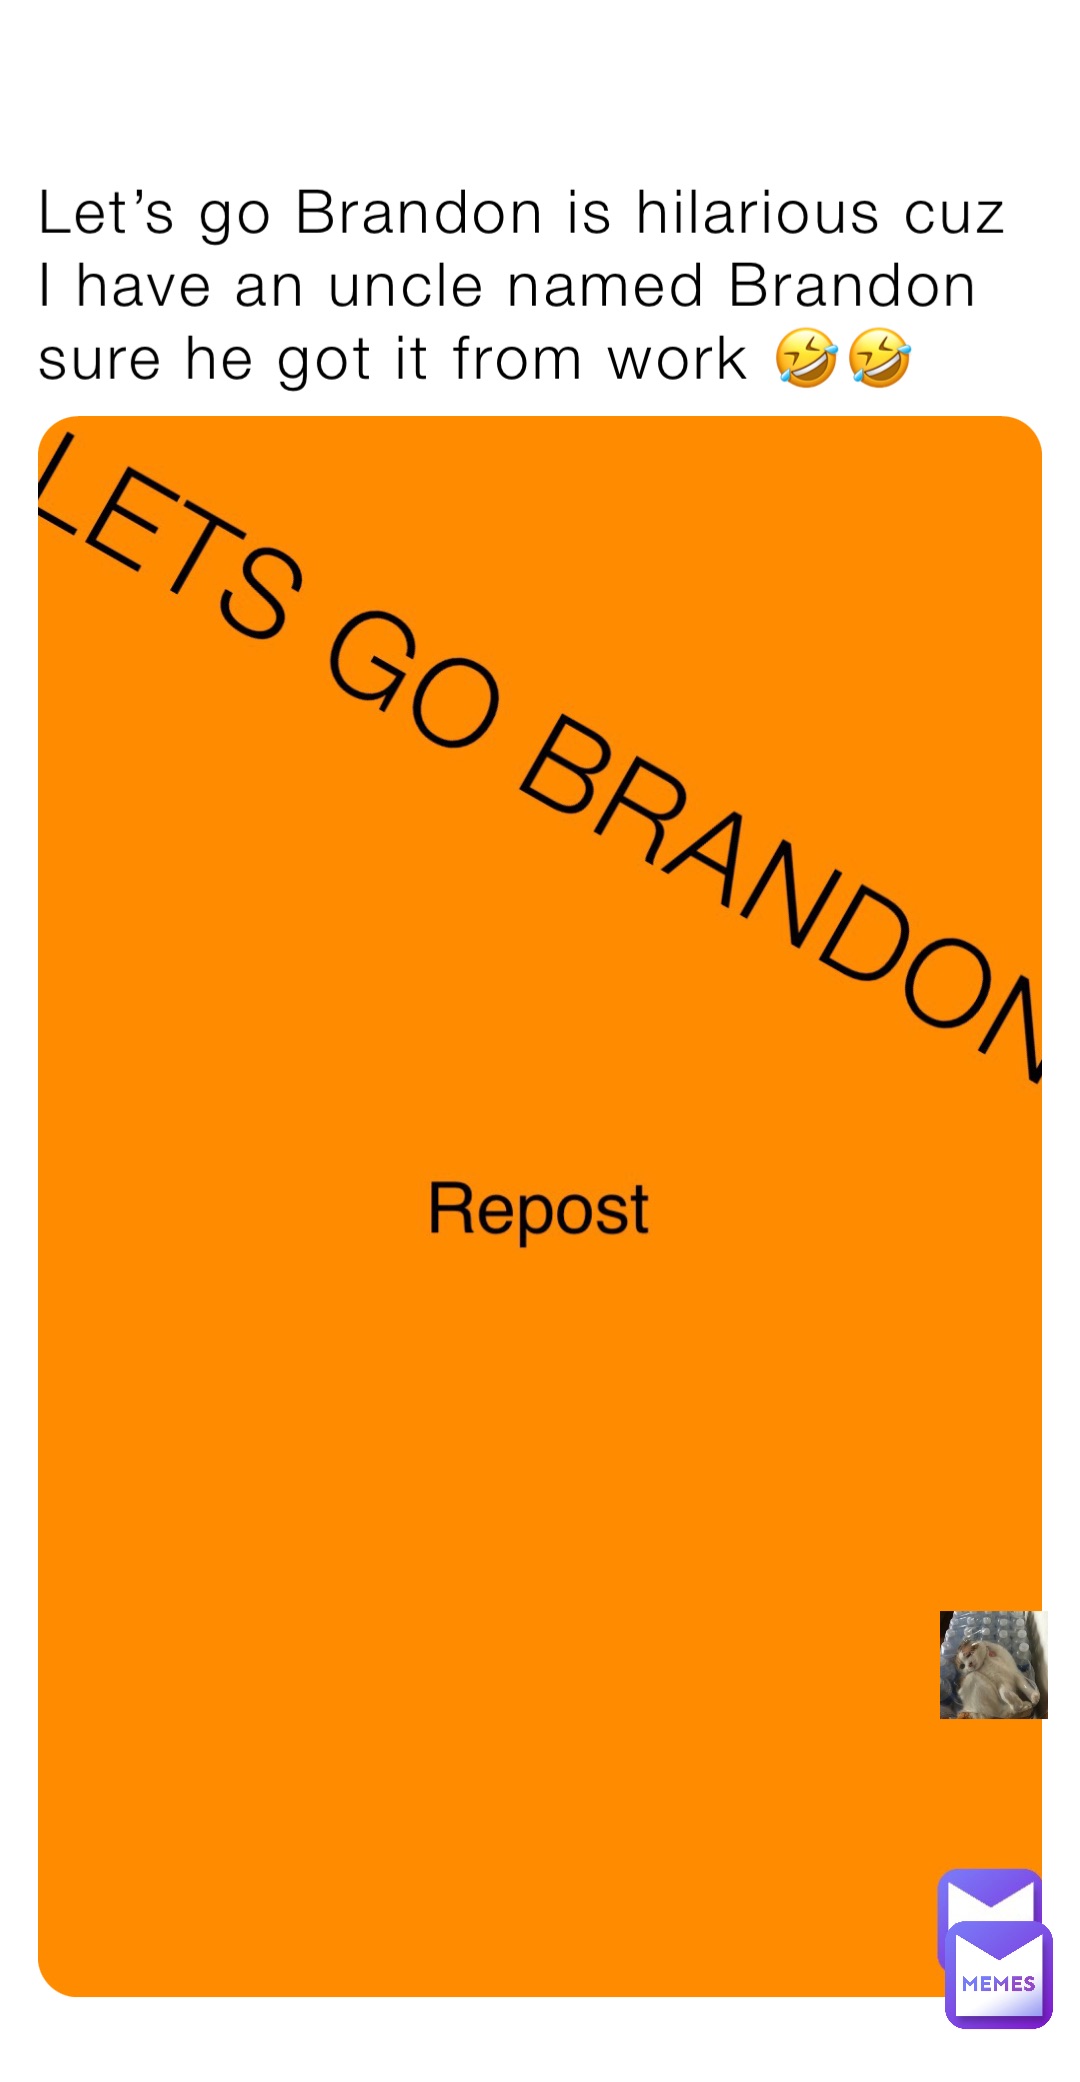 Let’s go Brandon is hilarious cuz I have an uncle named Brandon sure he got it from work 🤣🤣